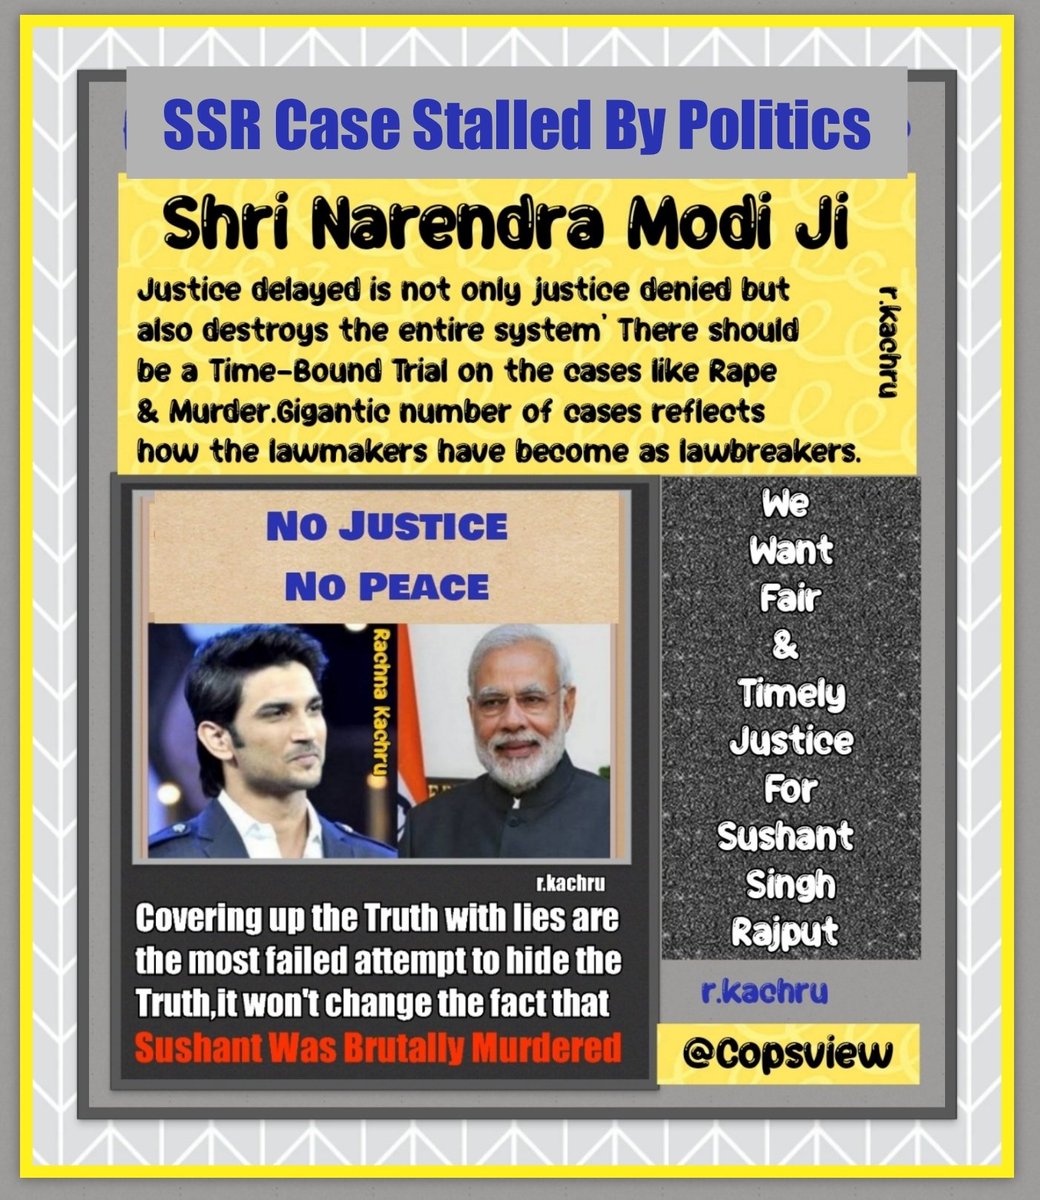 🔱Har Har Mahadev🔱

These Politicians are literally & actually ABUSING SSRCase for their own Political Gains & Benefits It's s Shameful @PMOIndia
Is @CBIHeadquarters the handmaiden of the Govt.& Powerful & Influential People❓
 @Copsview File302

TL~SSR Case Stalled By Politics